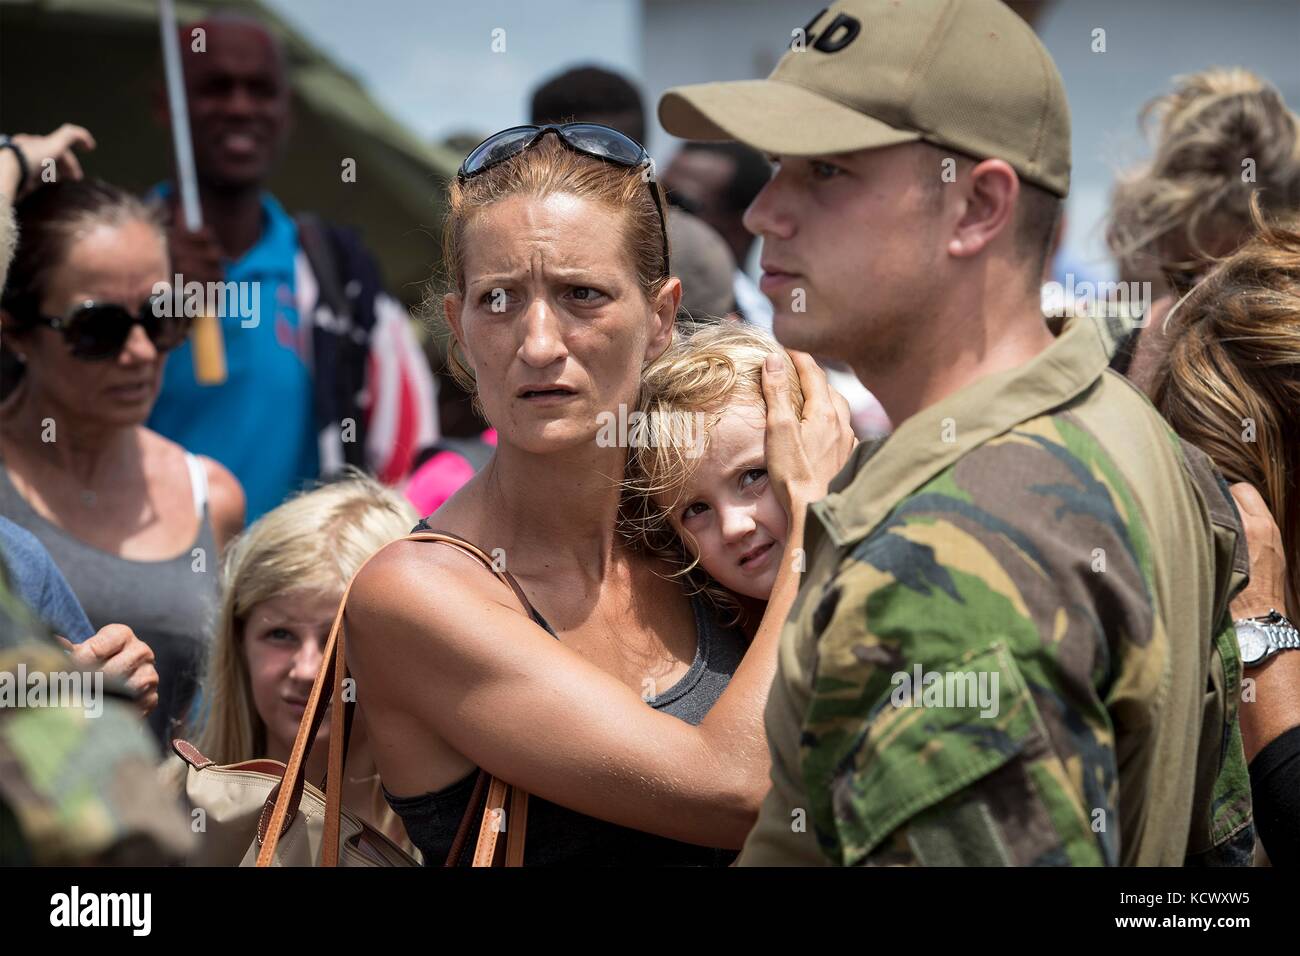 Royal Dutch Marines assist with evacuation of residents and tourists stranded in the aftermath of Hurricane Irma that devastated much of the Leeward Islands September 14, 2017 in Philipsburg, St. Maarten. Stock Photo